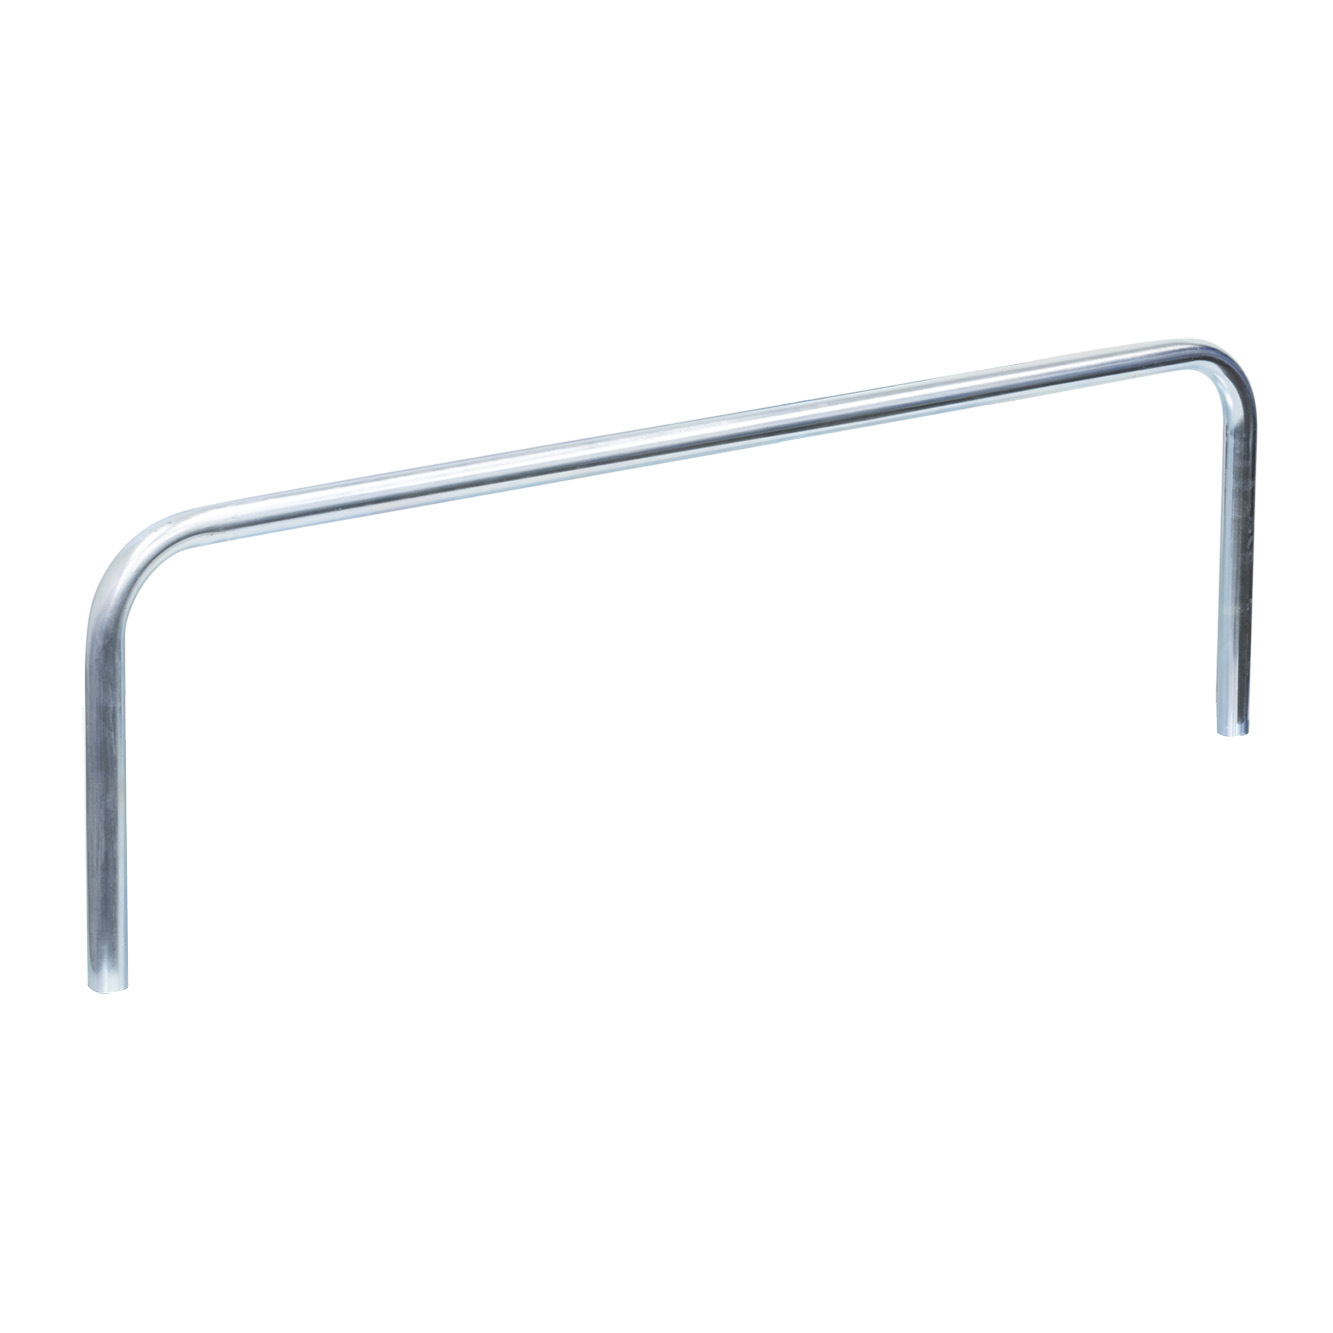 Low Load Bar to suit